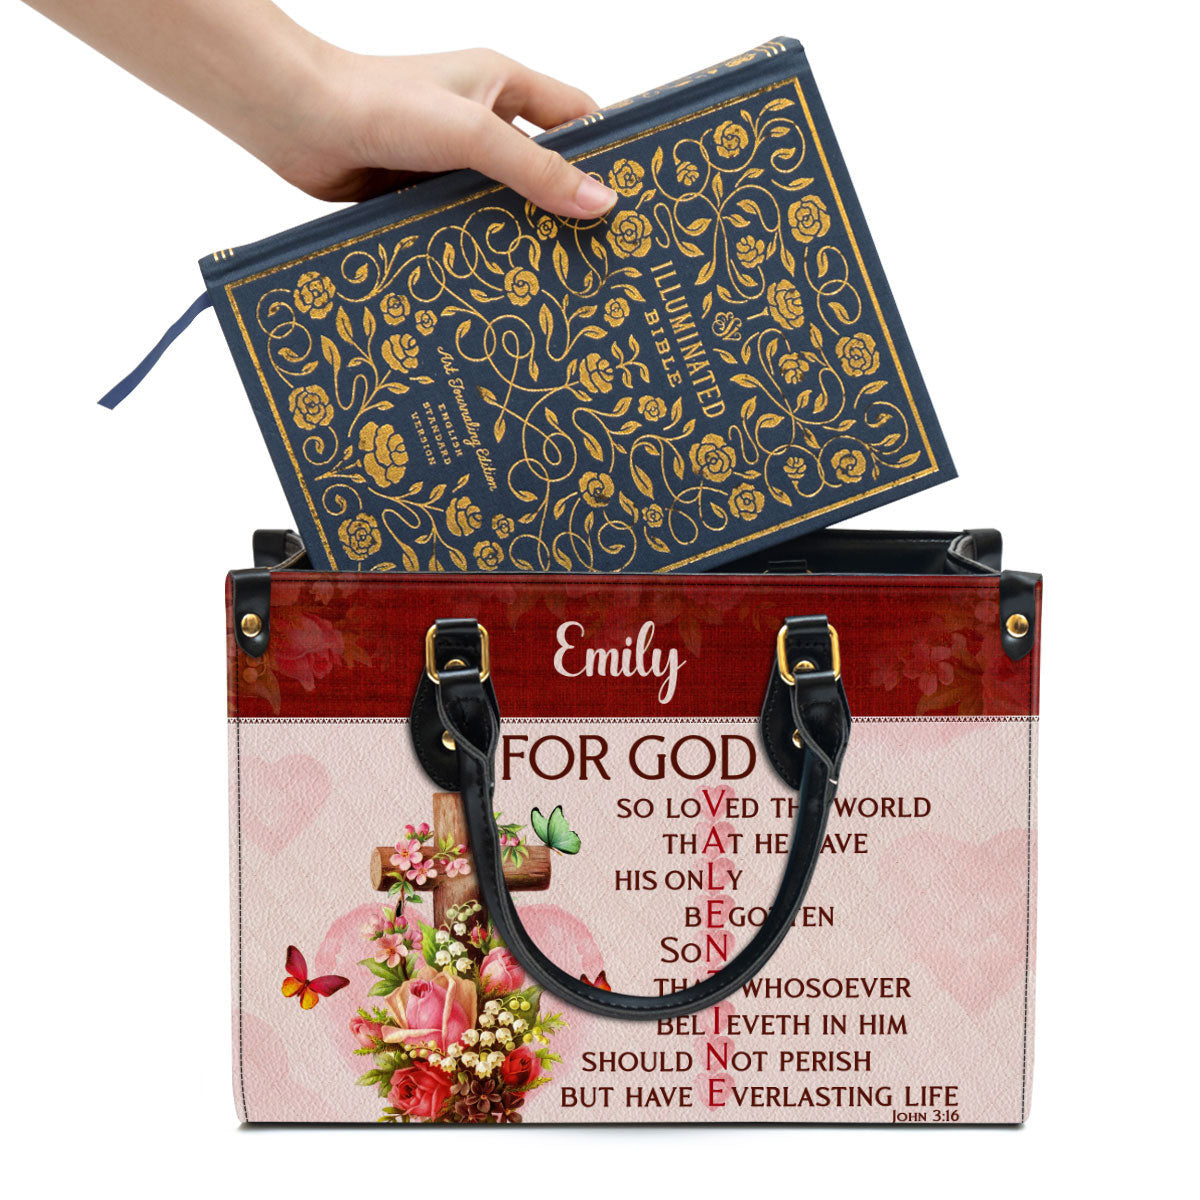 Personalized Leather Bag For God So Loved The World Christian Valentine Gifts For Women Of God